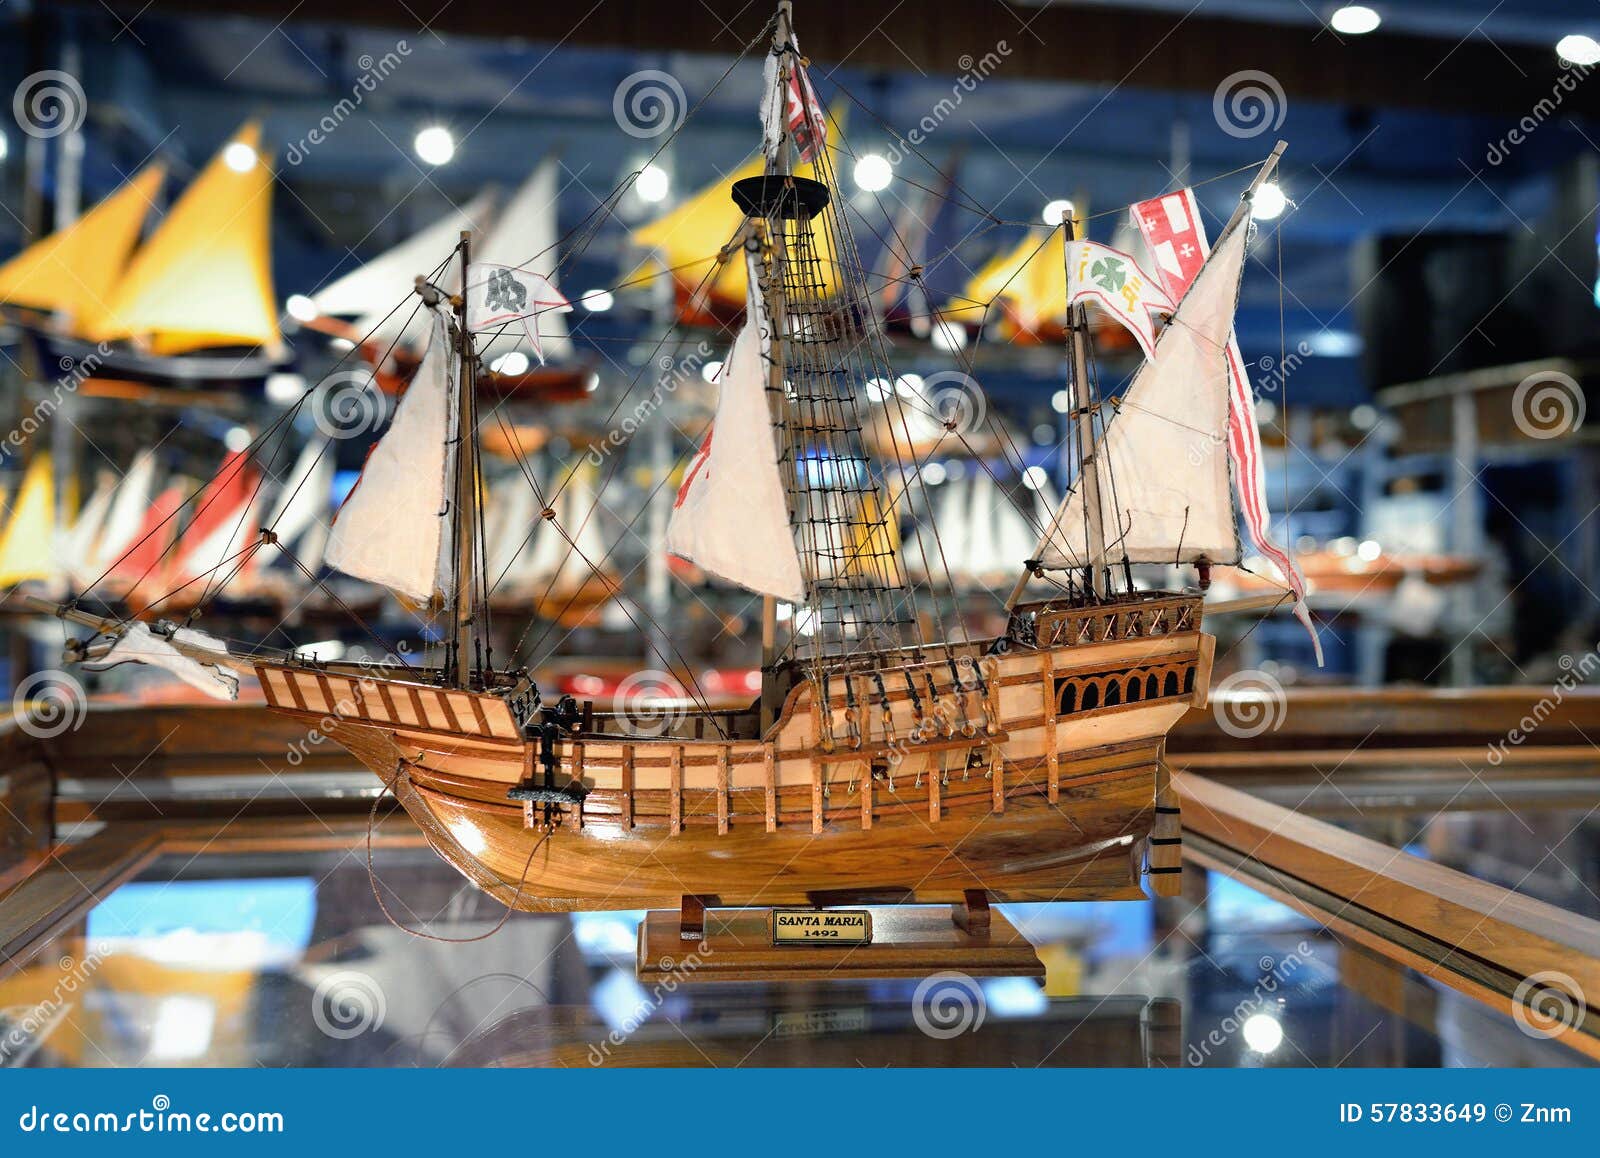 Wooden Replica Of The Old Famous Vessel Editorial Stock 